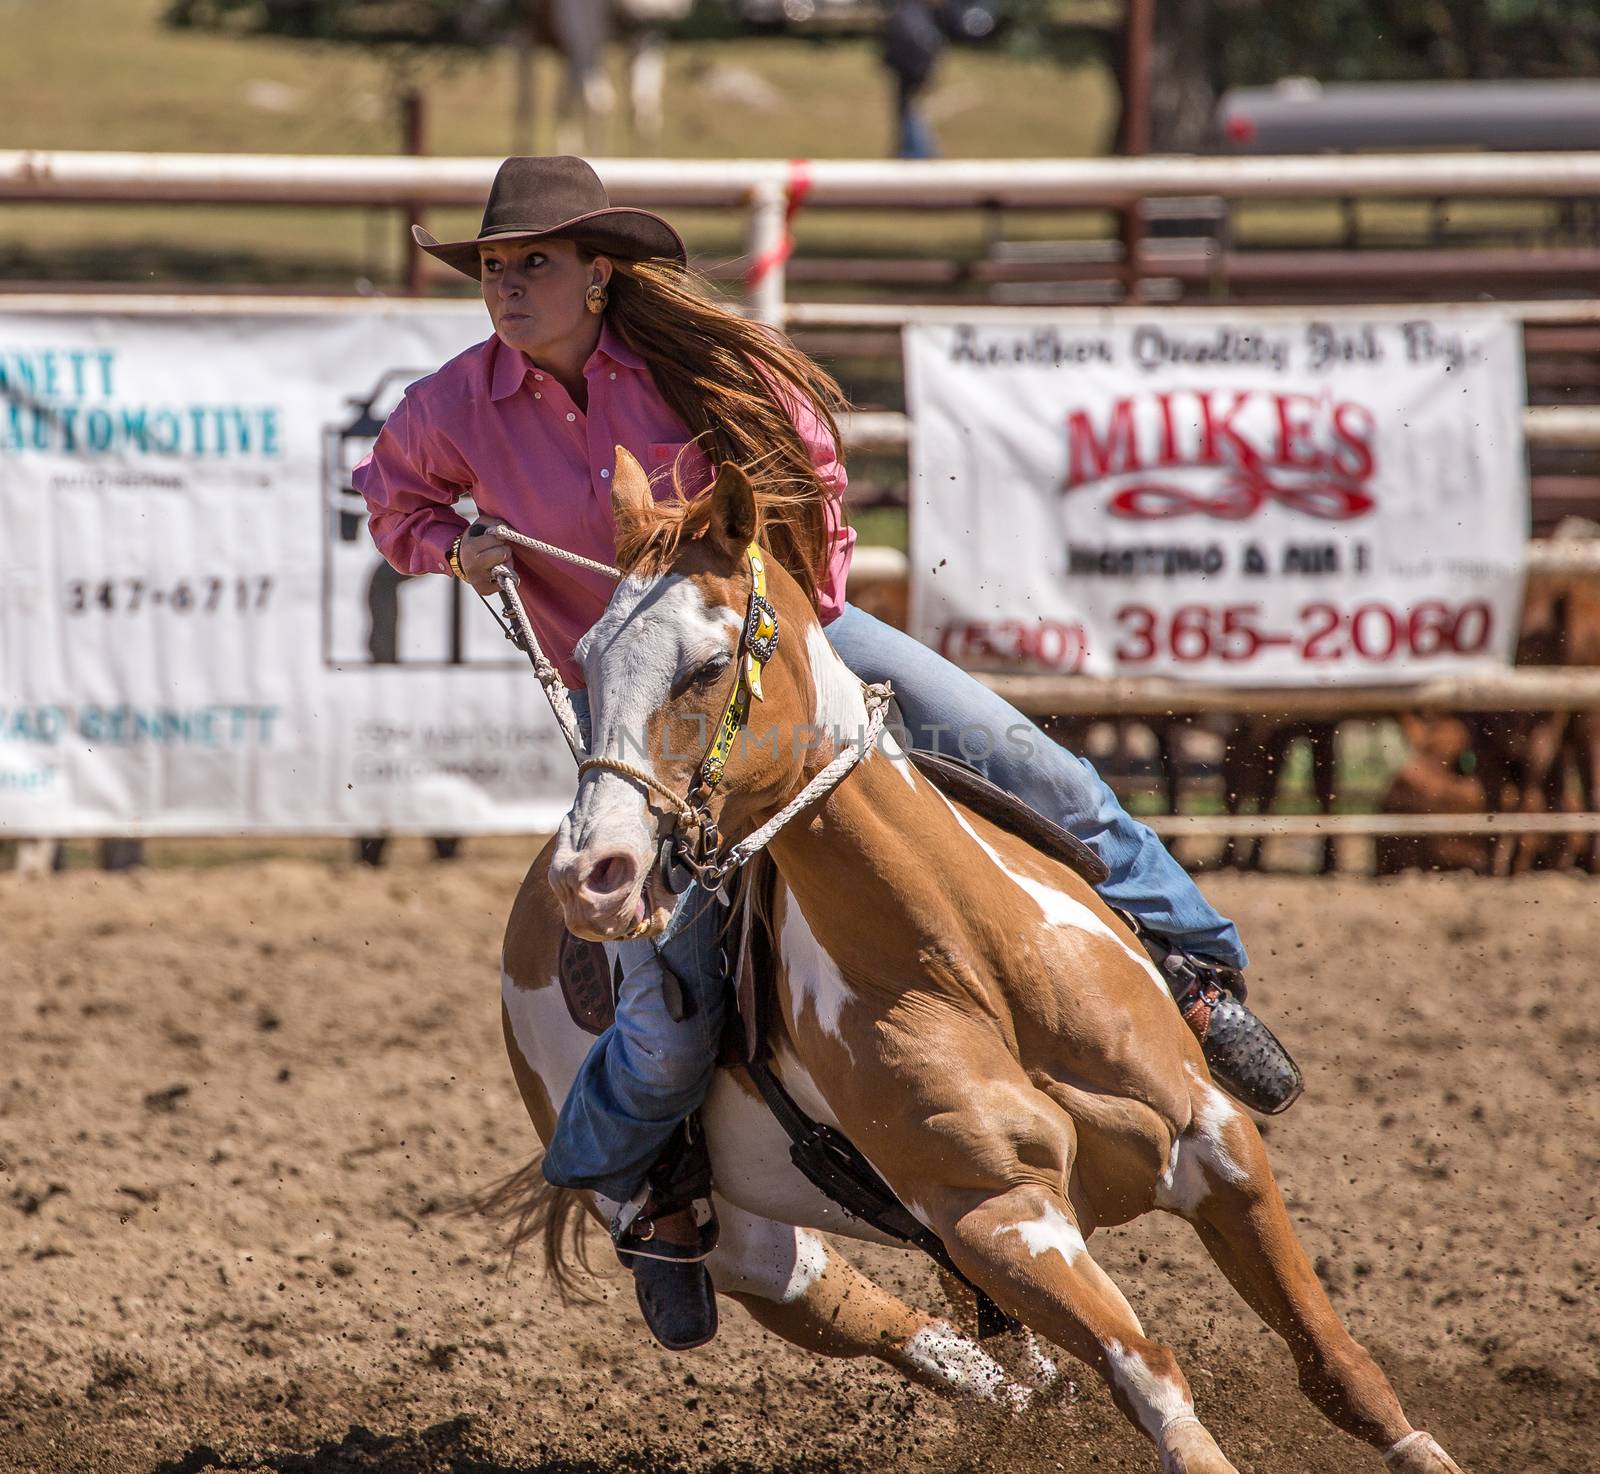 A barrel racer riders her horse to the next barrel. The rodeo in Cottonwood, California is a popular event on Mother's Day weekend in this small northern California town. This photo was taken in May, 2014.